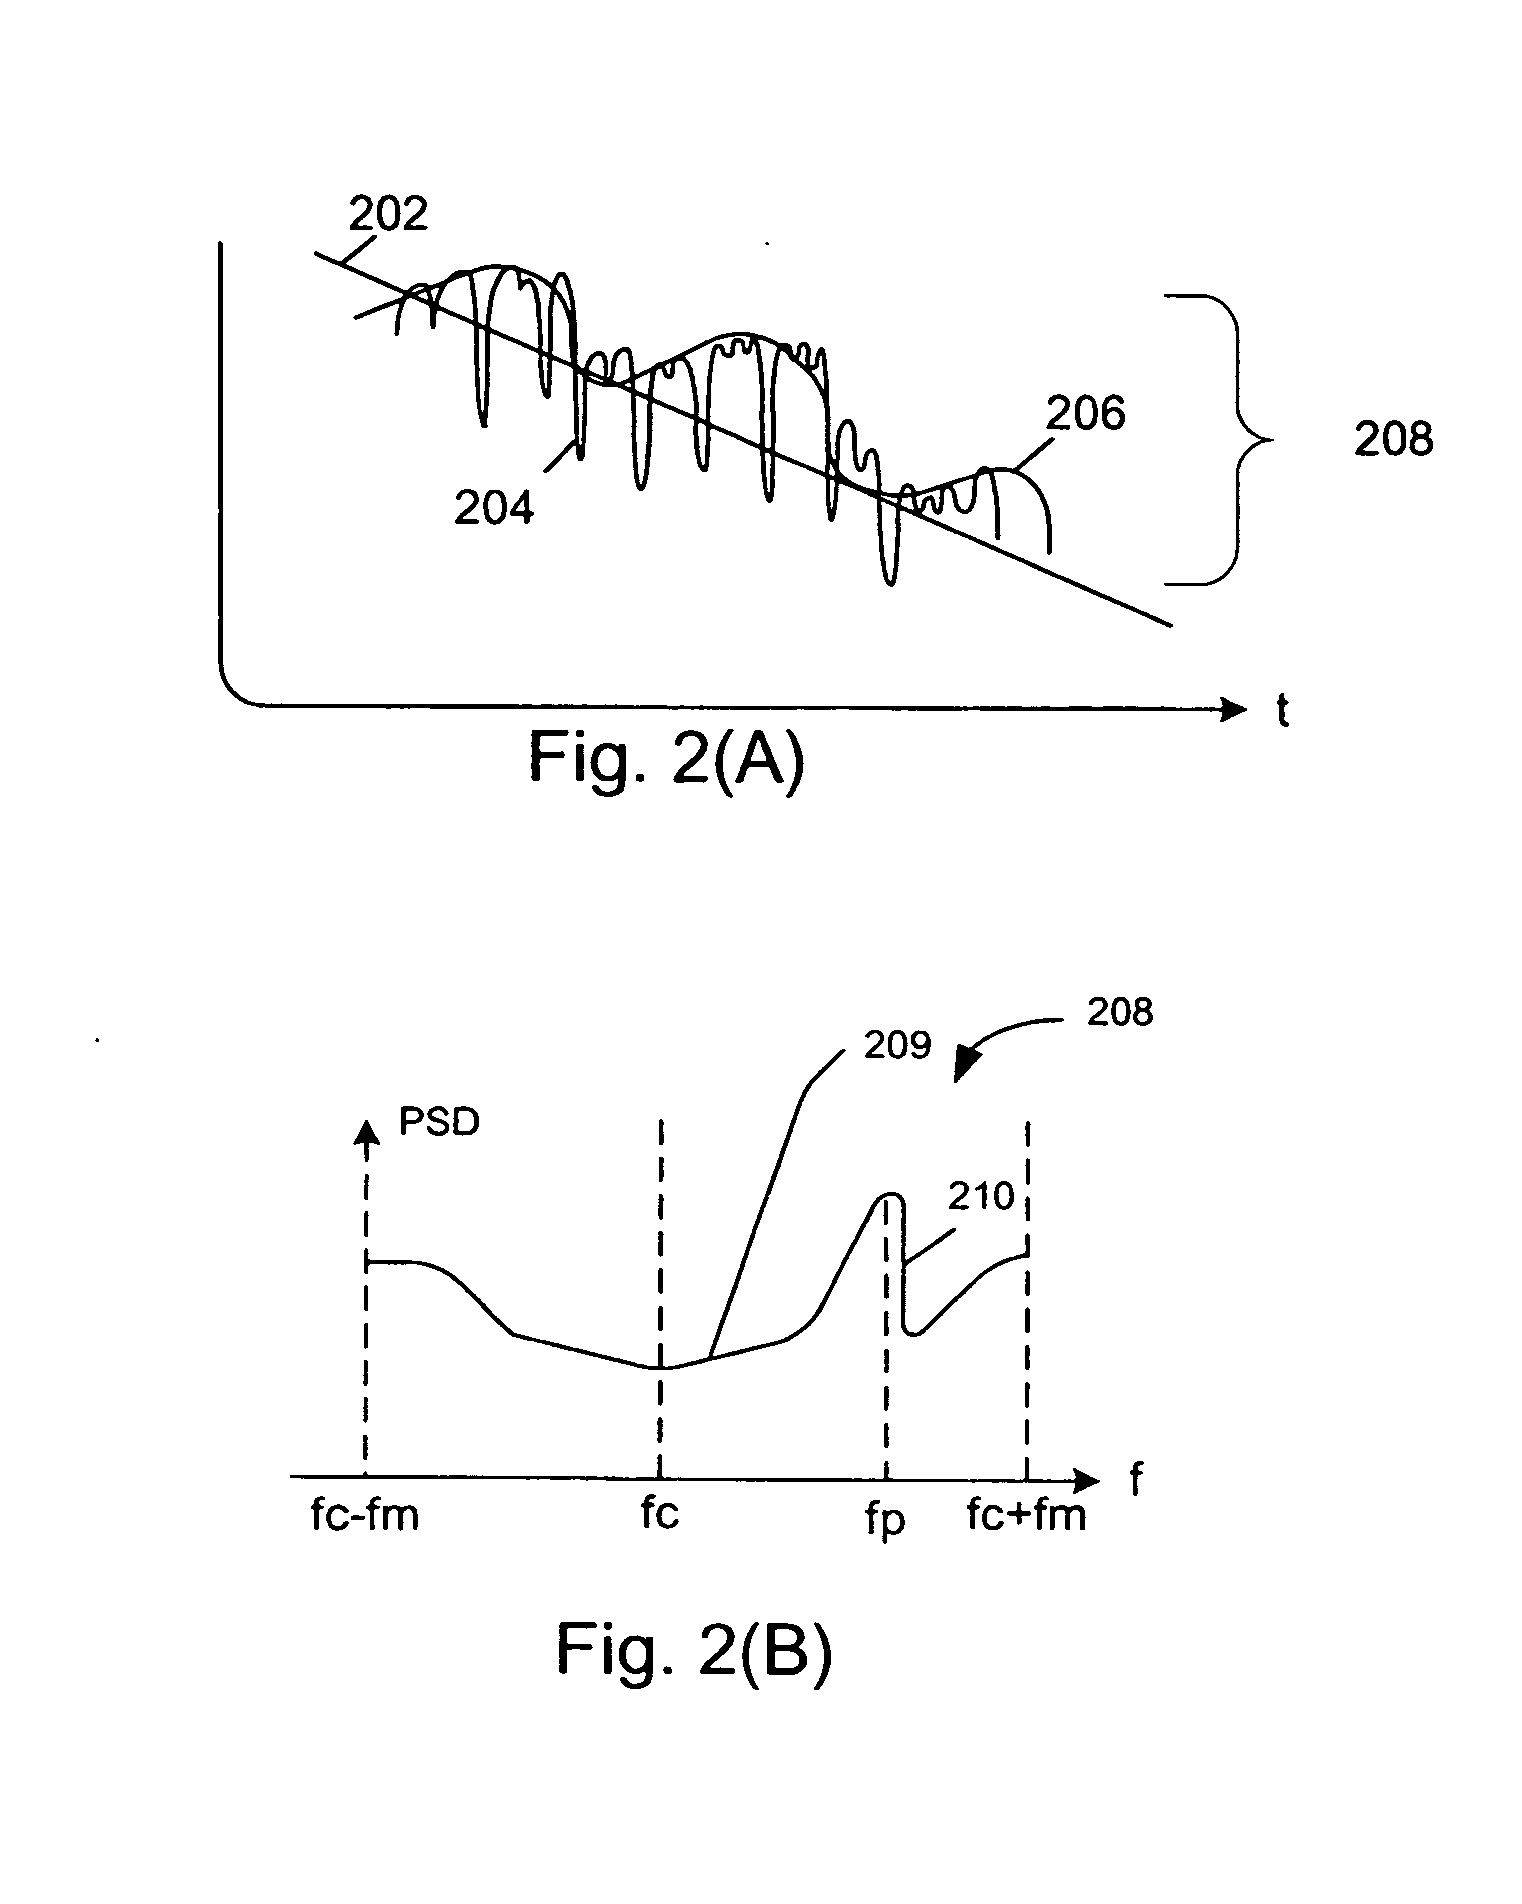 Systems and methods for testing the performance of and simulating a wireless communication device